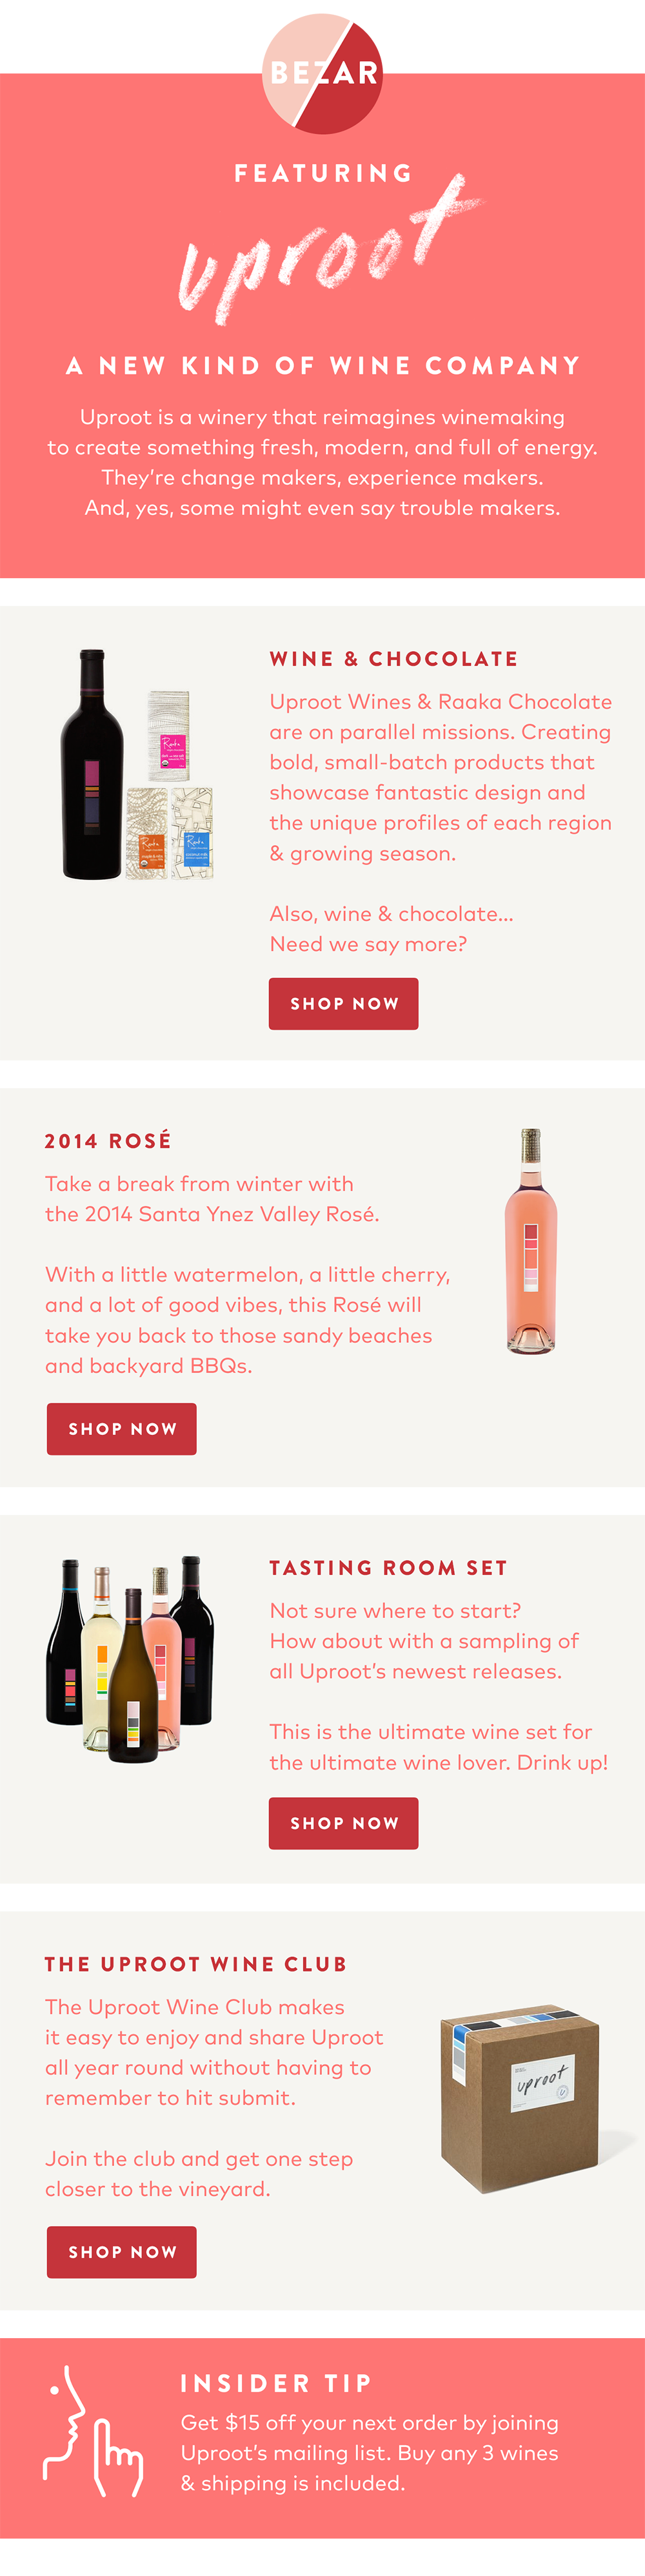 Bezar 2016 wine gifts and recommendations